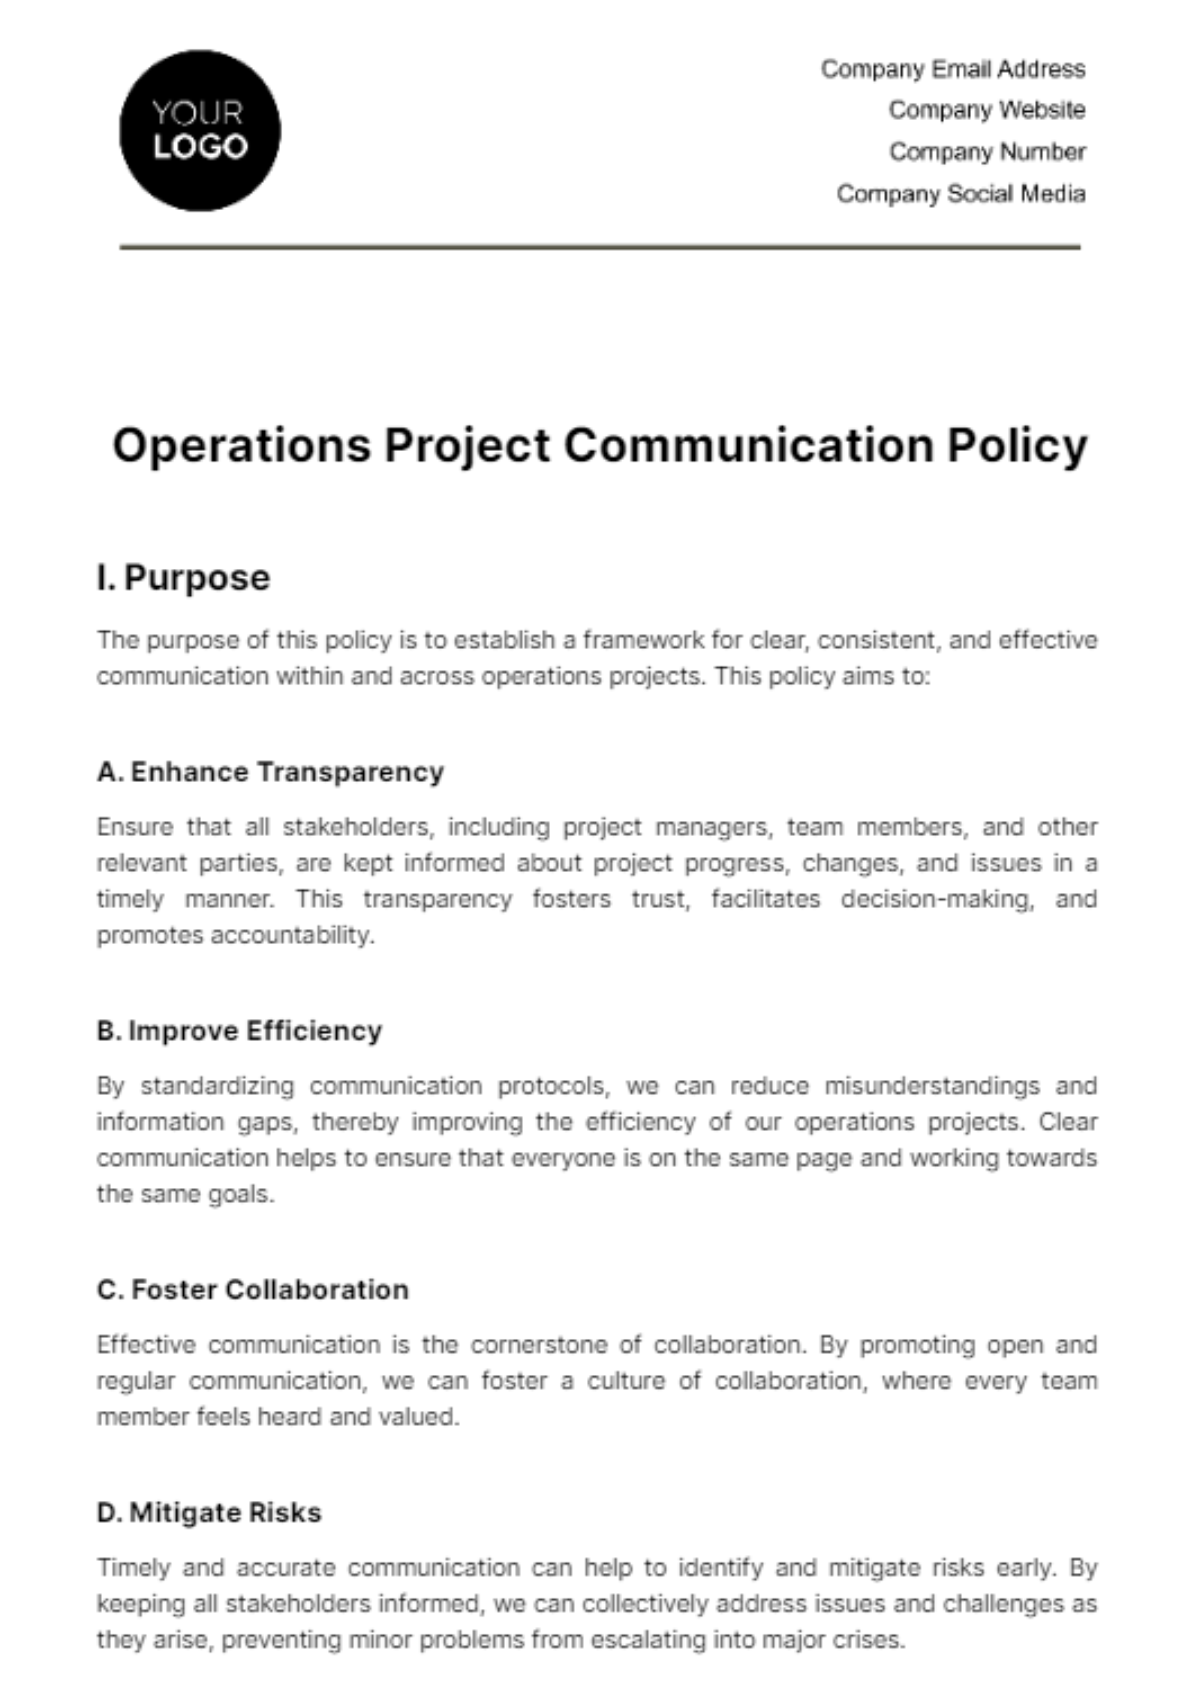 Operations Project Communication Policy Template